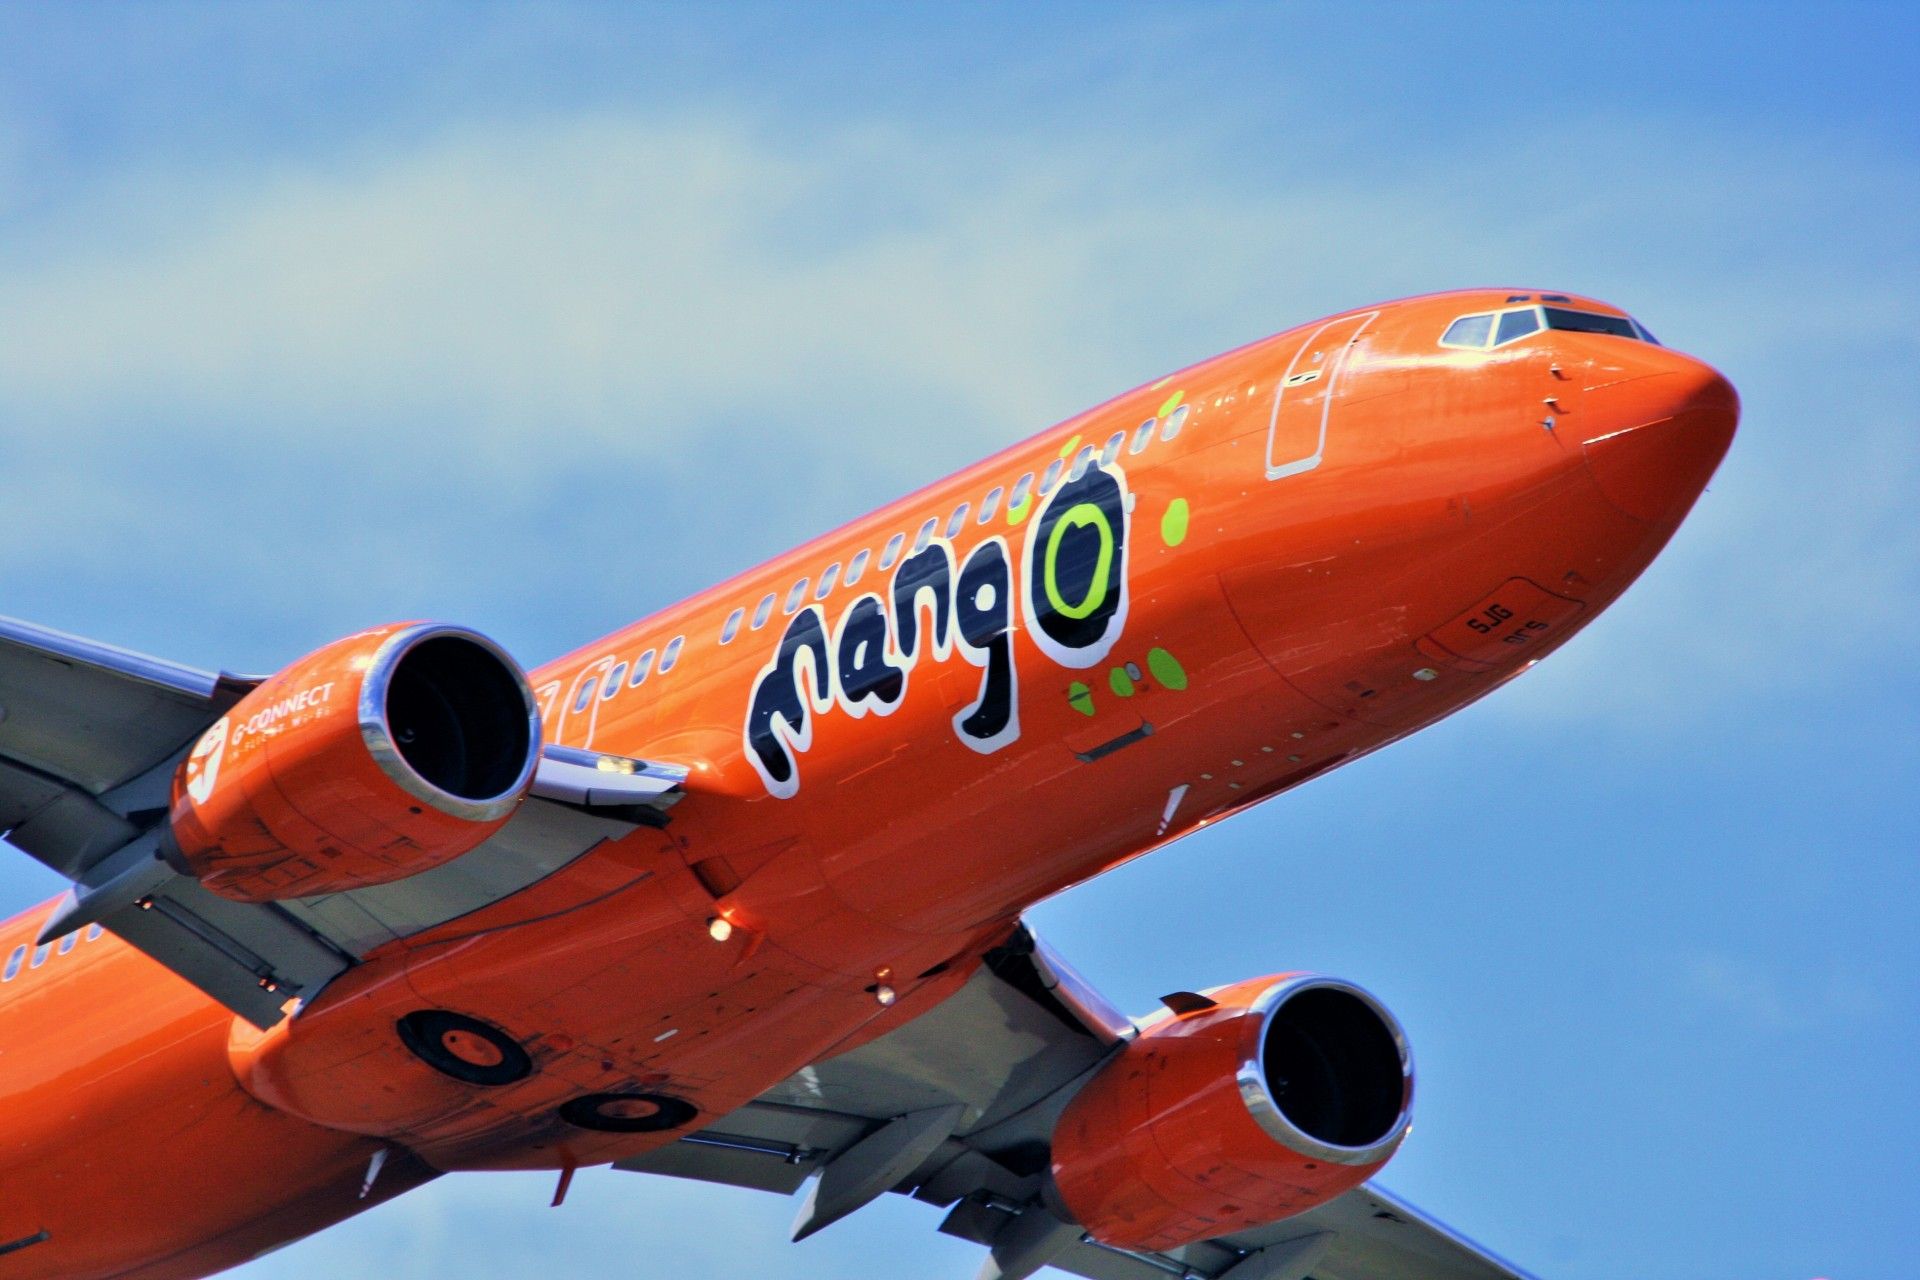 South Africa's once loved budget carrier Mango Airlines